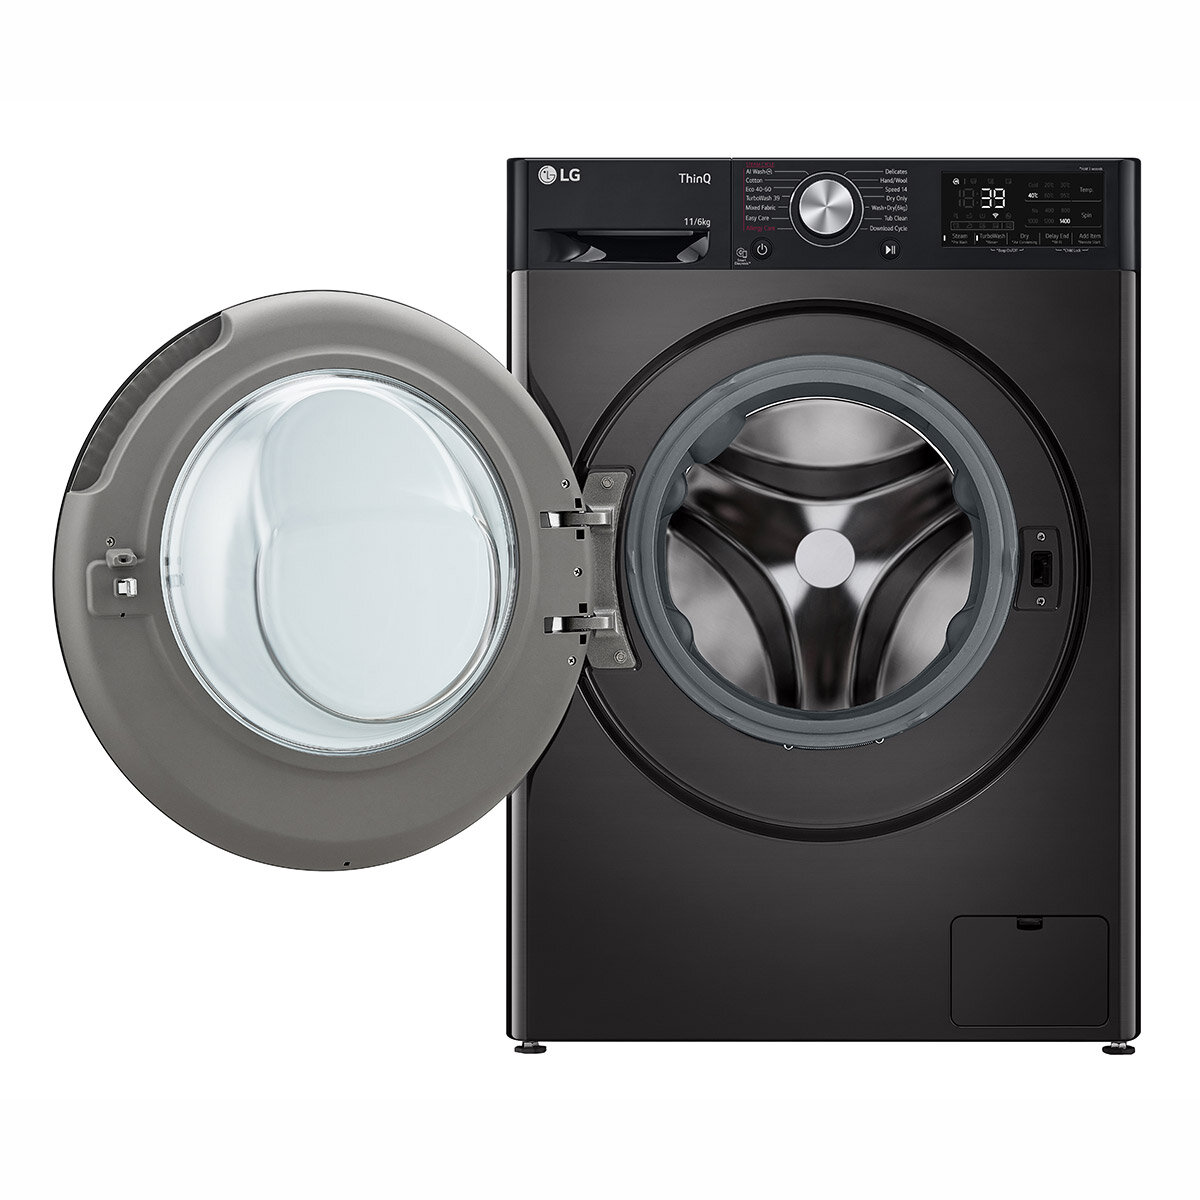 Open LG FWY916BBTN1 11/6kg Washer Dryer, D Rated in Black